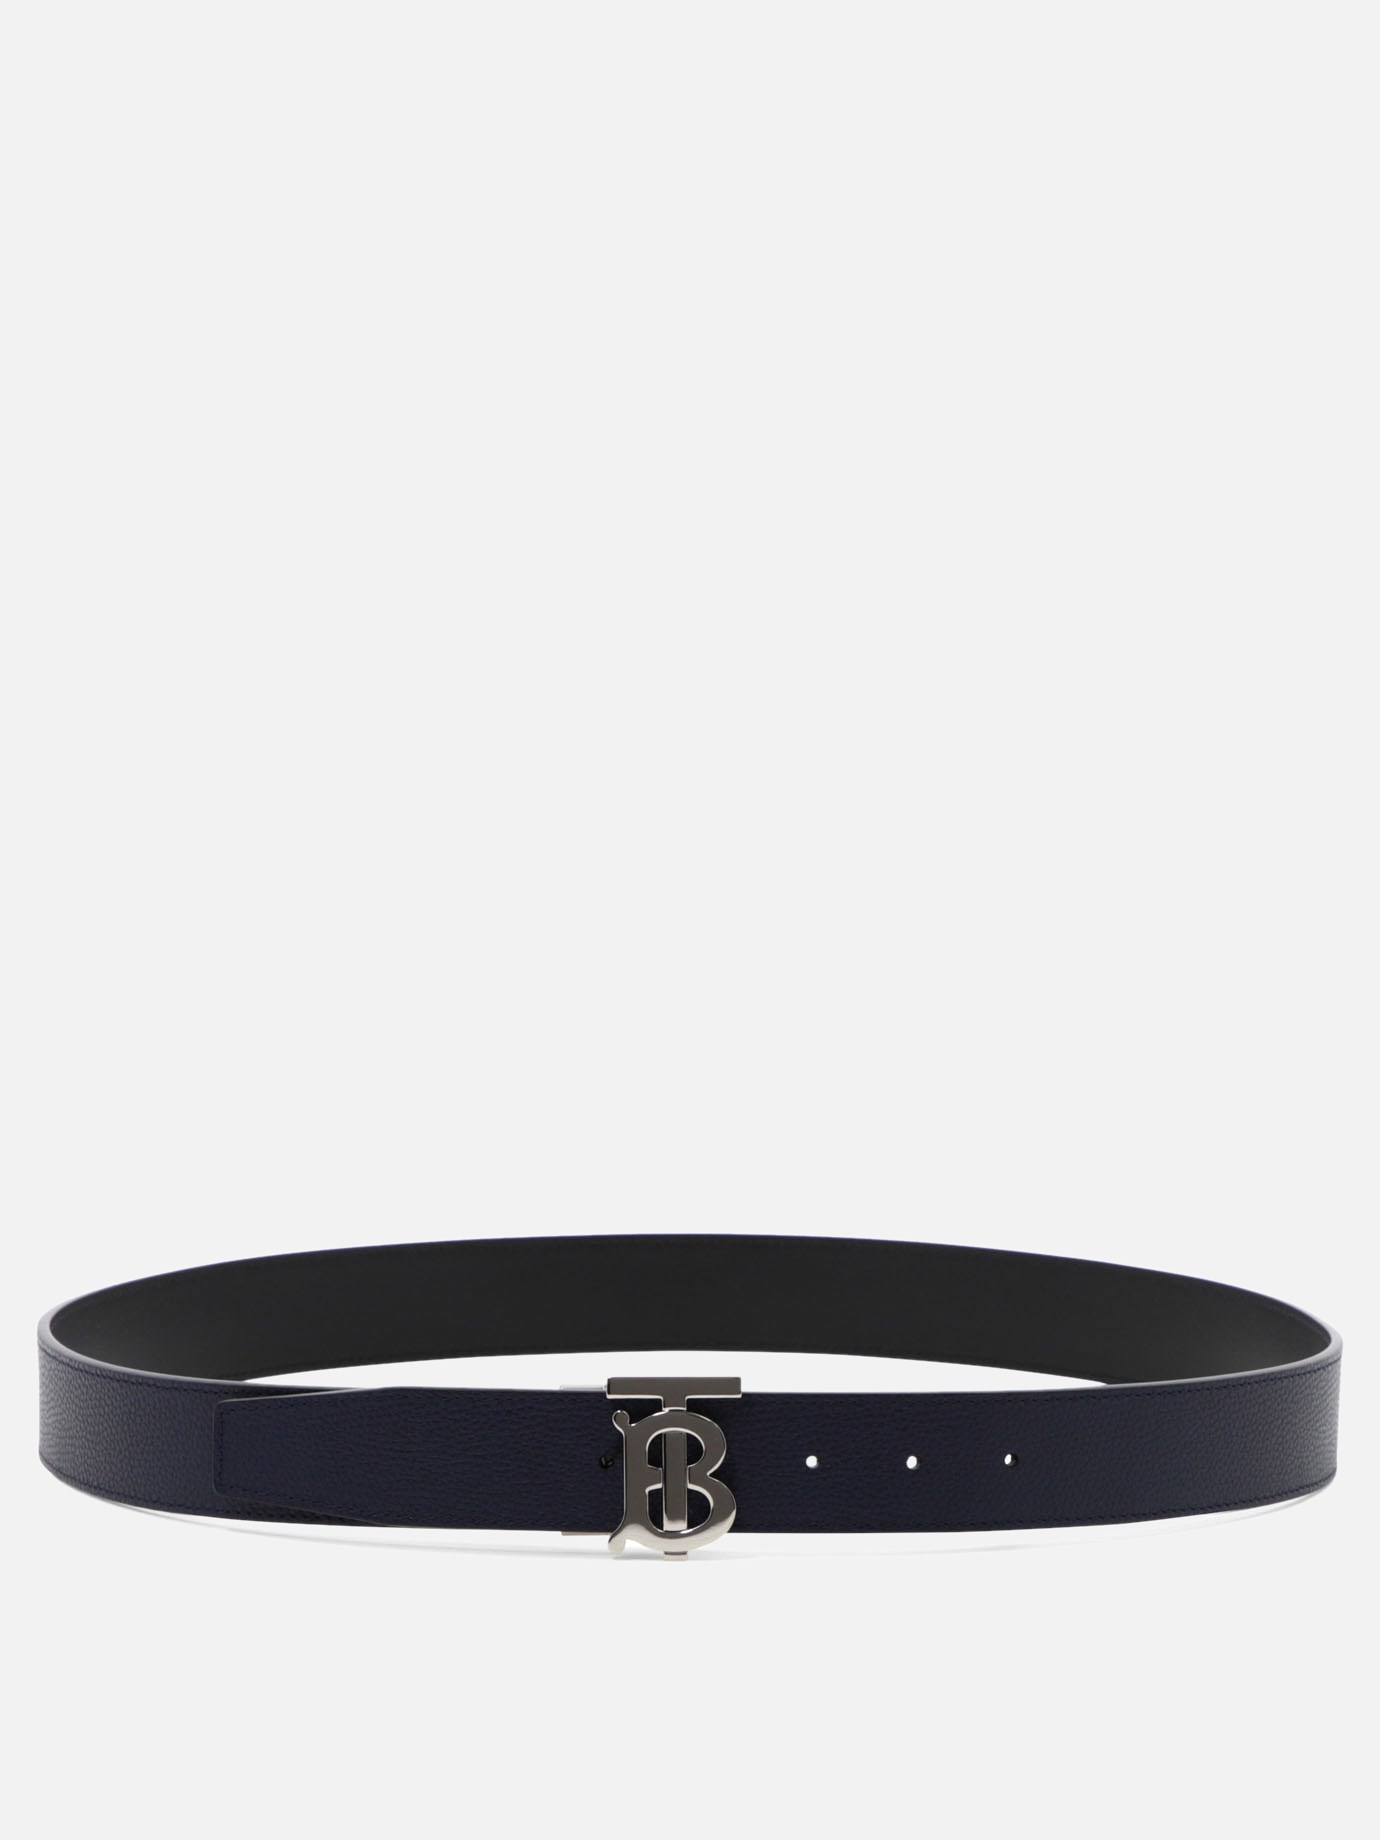  TB  reversible beltby Burberry - 1